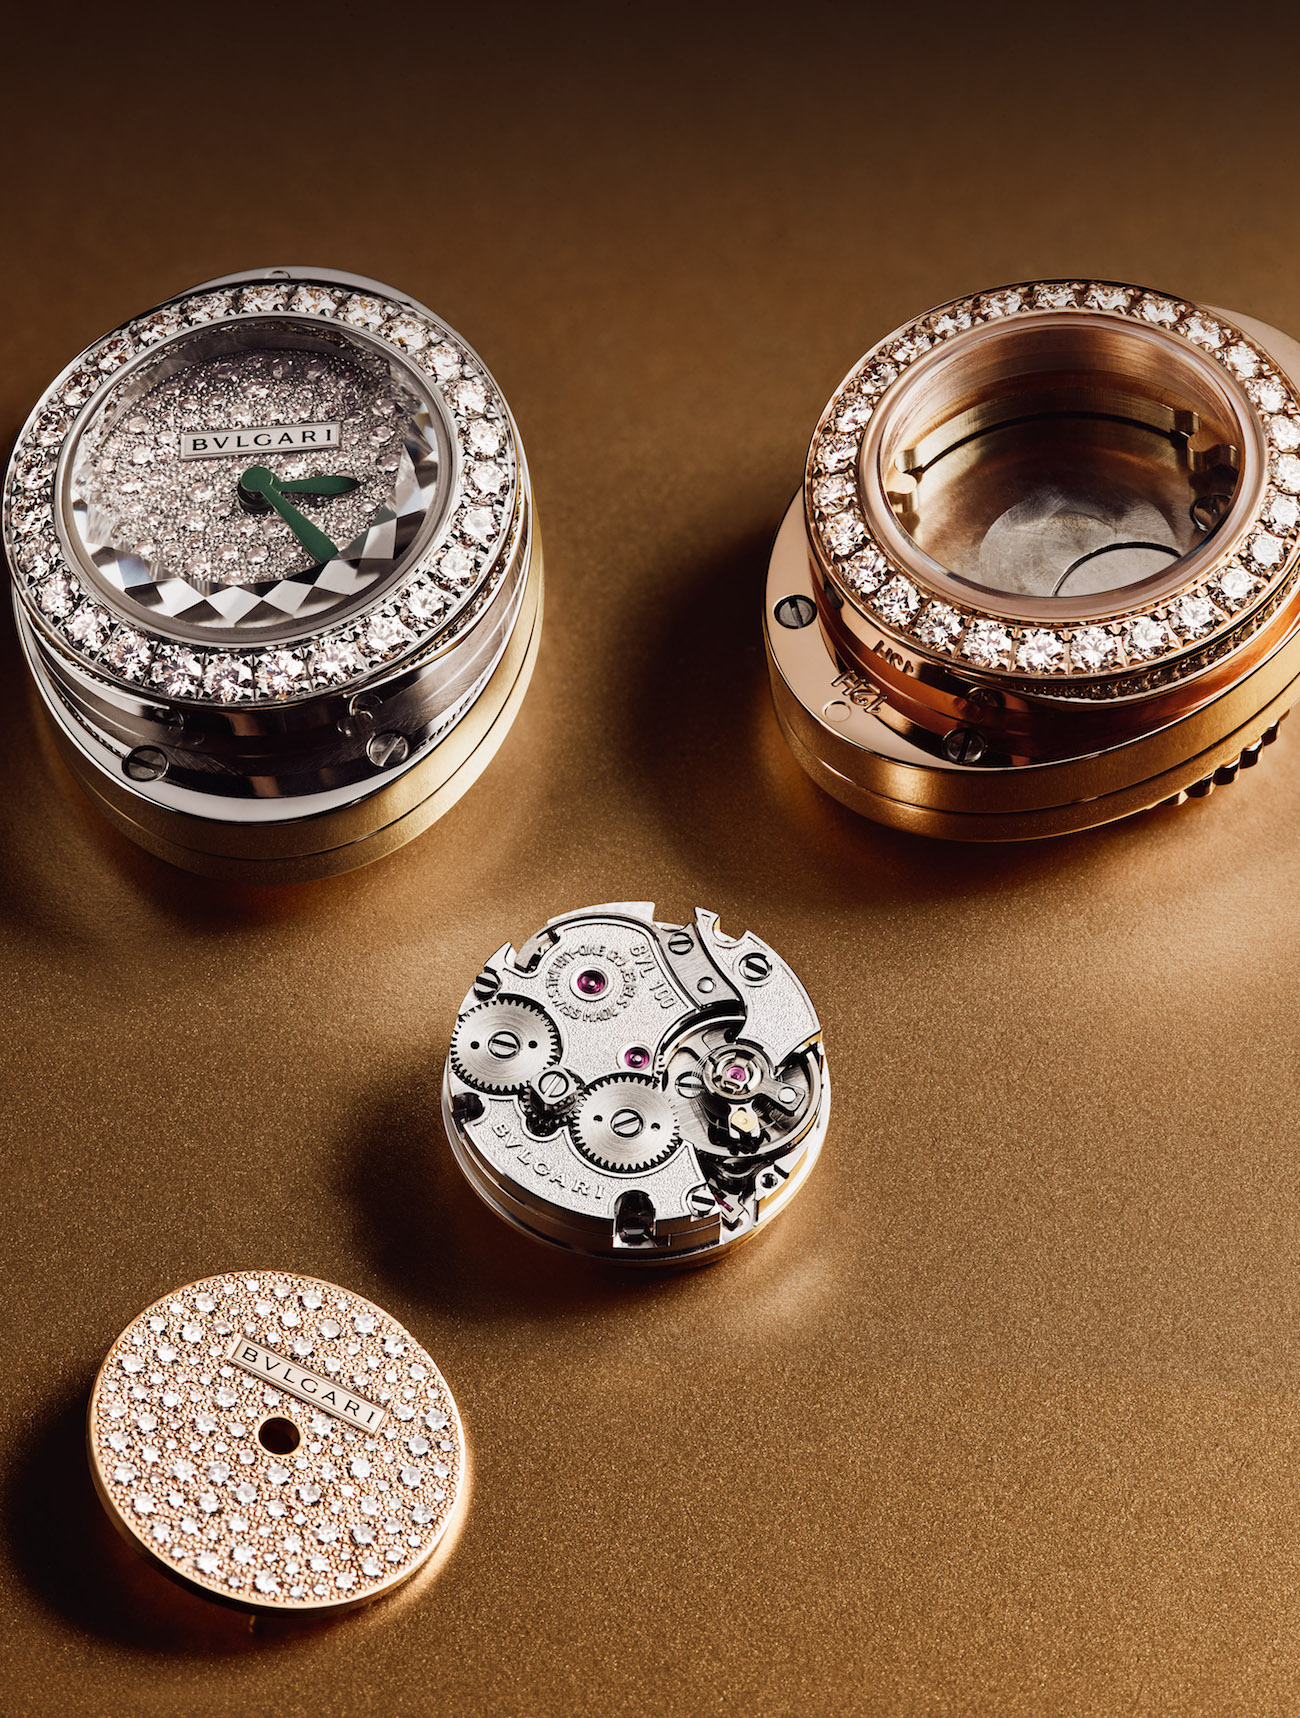 Bulgari - Set to revolutionise your style. Recreated for a